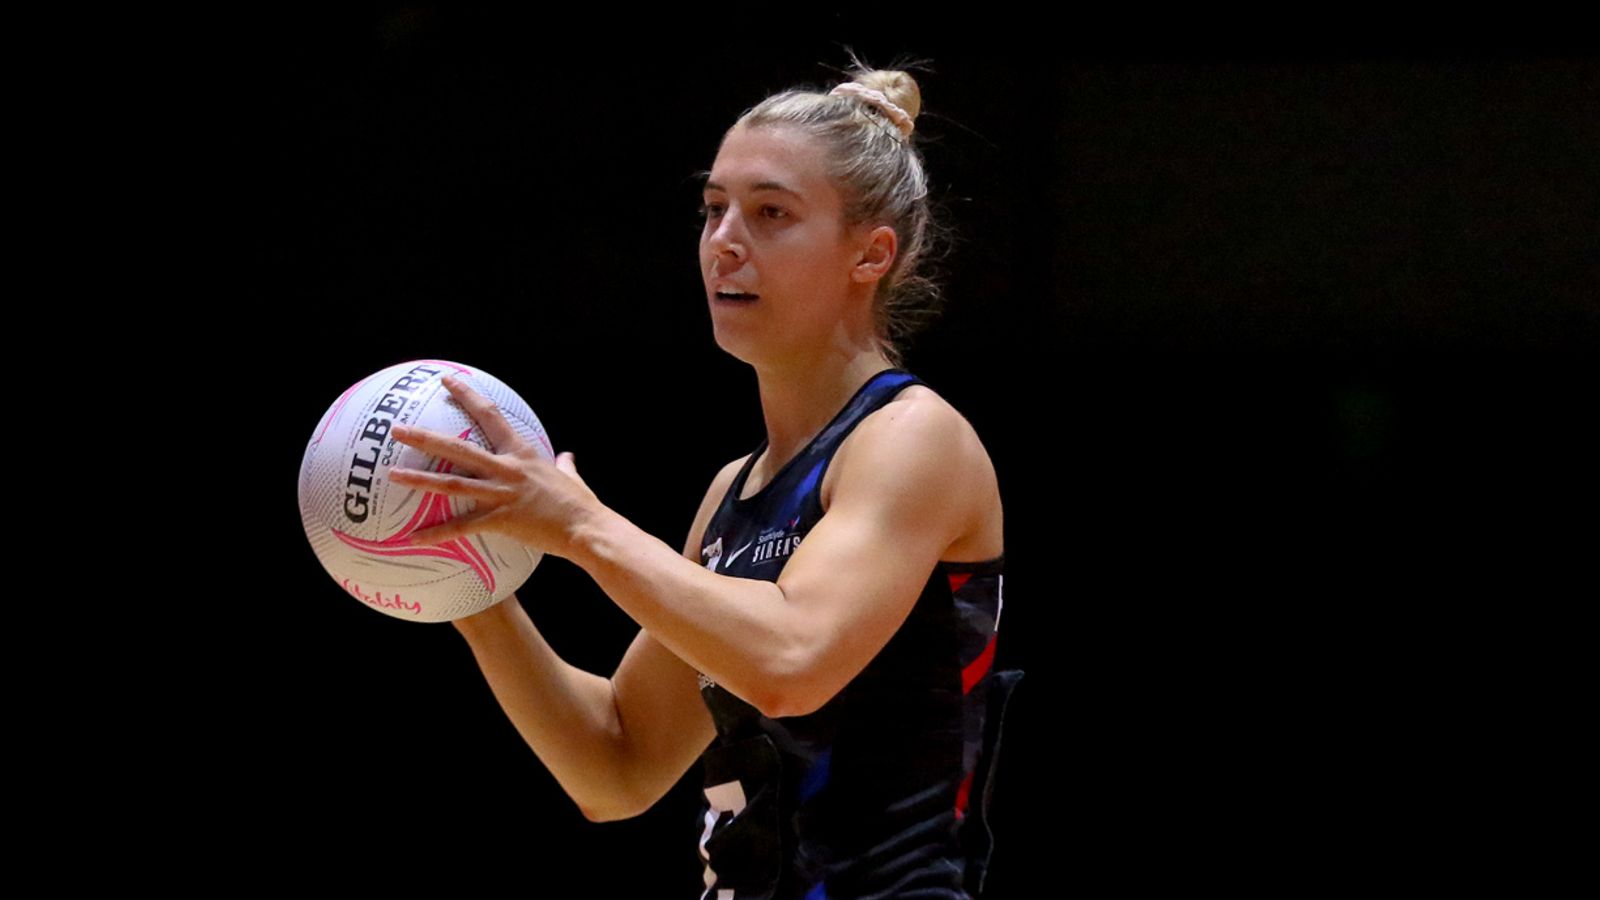 Strathclyde Sirens’ Gia Abernethy announces decision to retire from elite netball